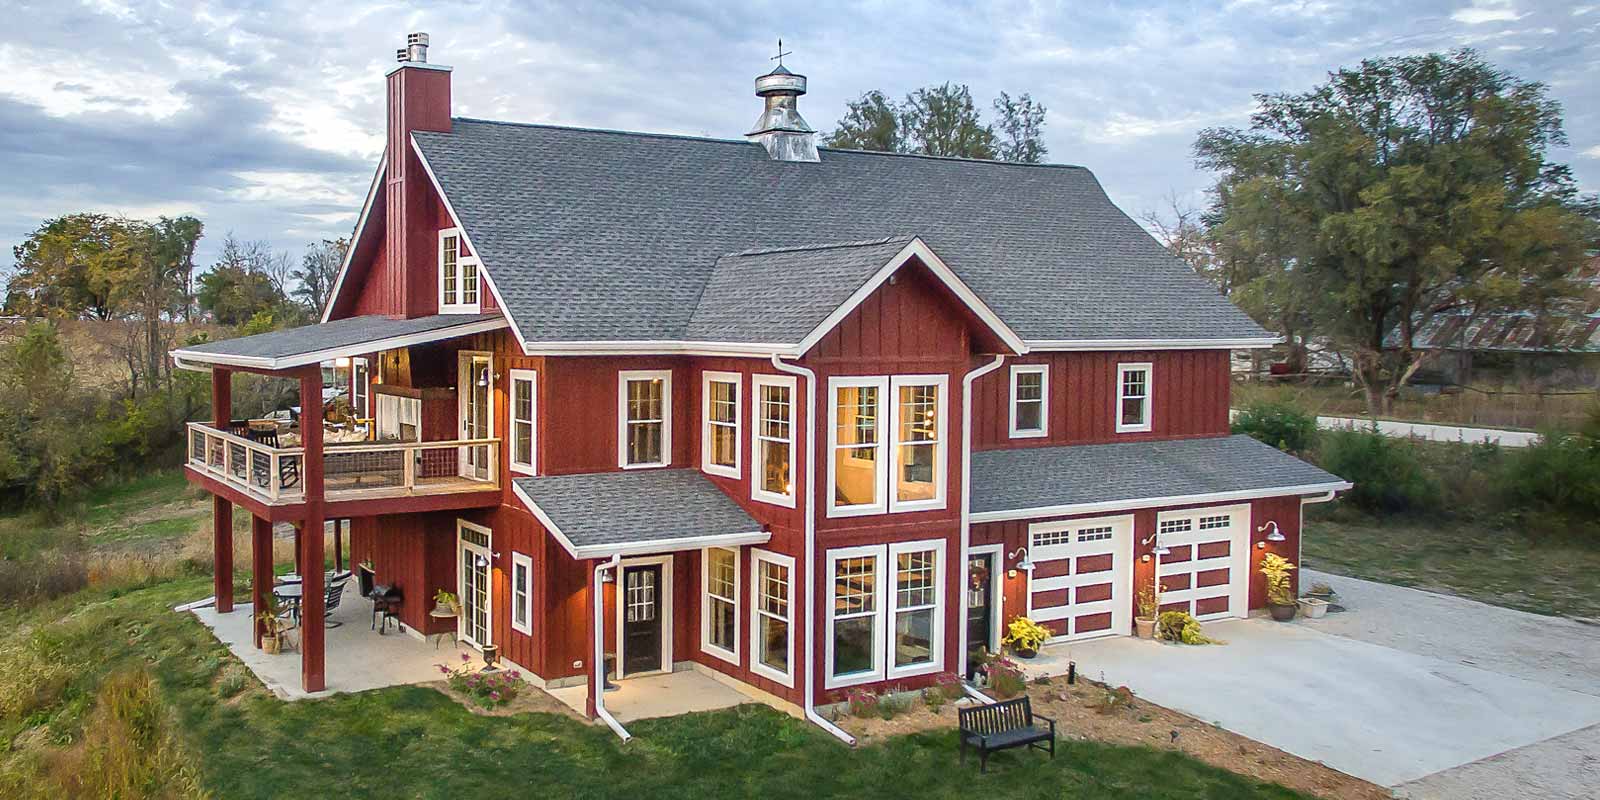 barn style custom new home in St. Charles, Iowa designed and built by Silent Rivers of Des Moines